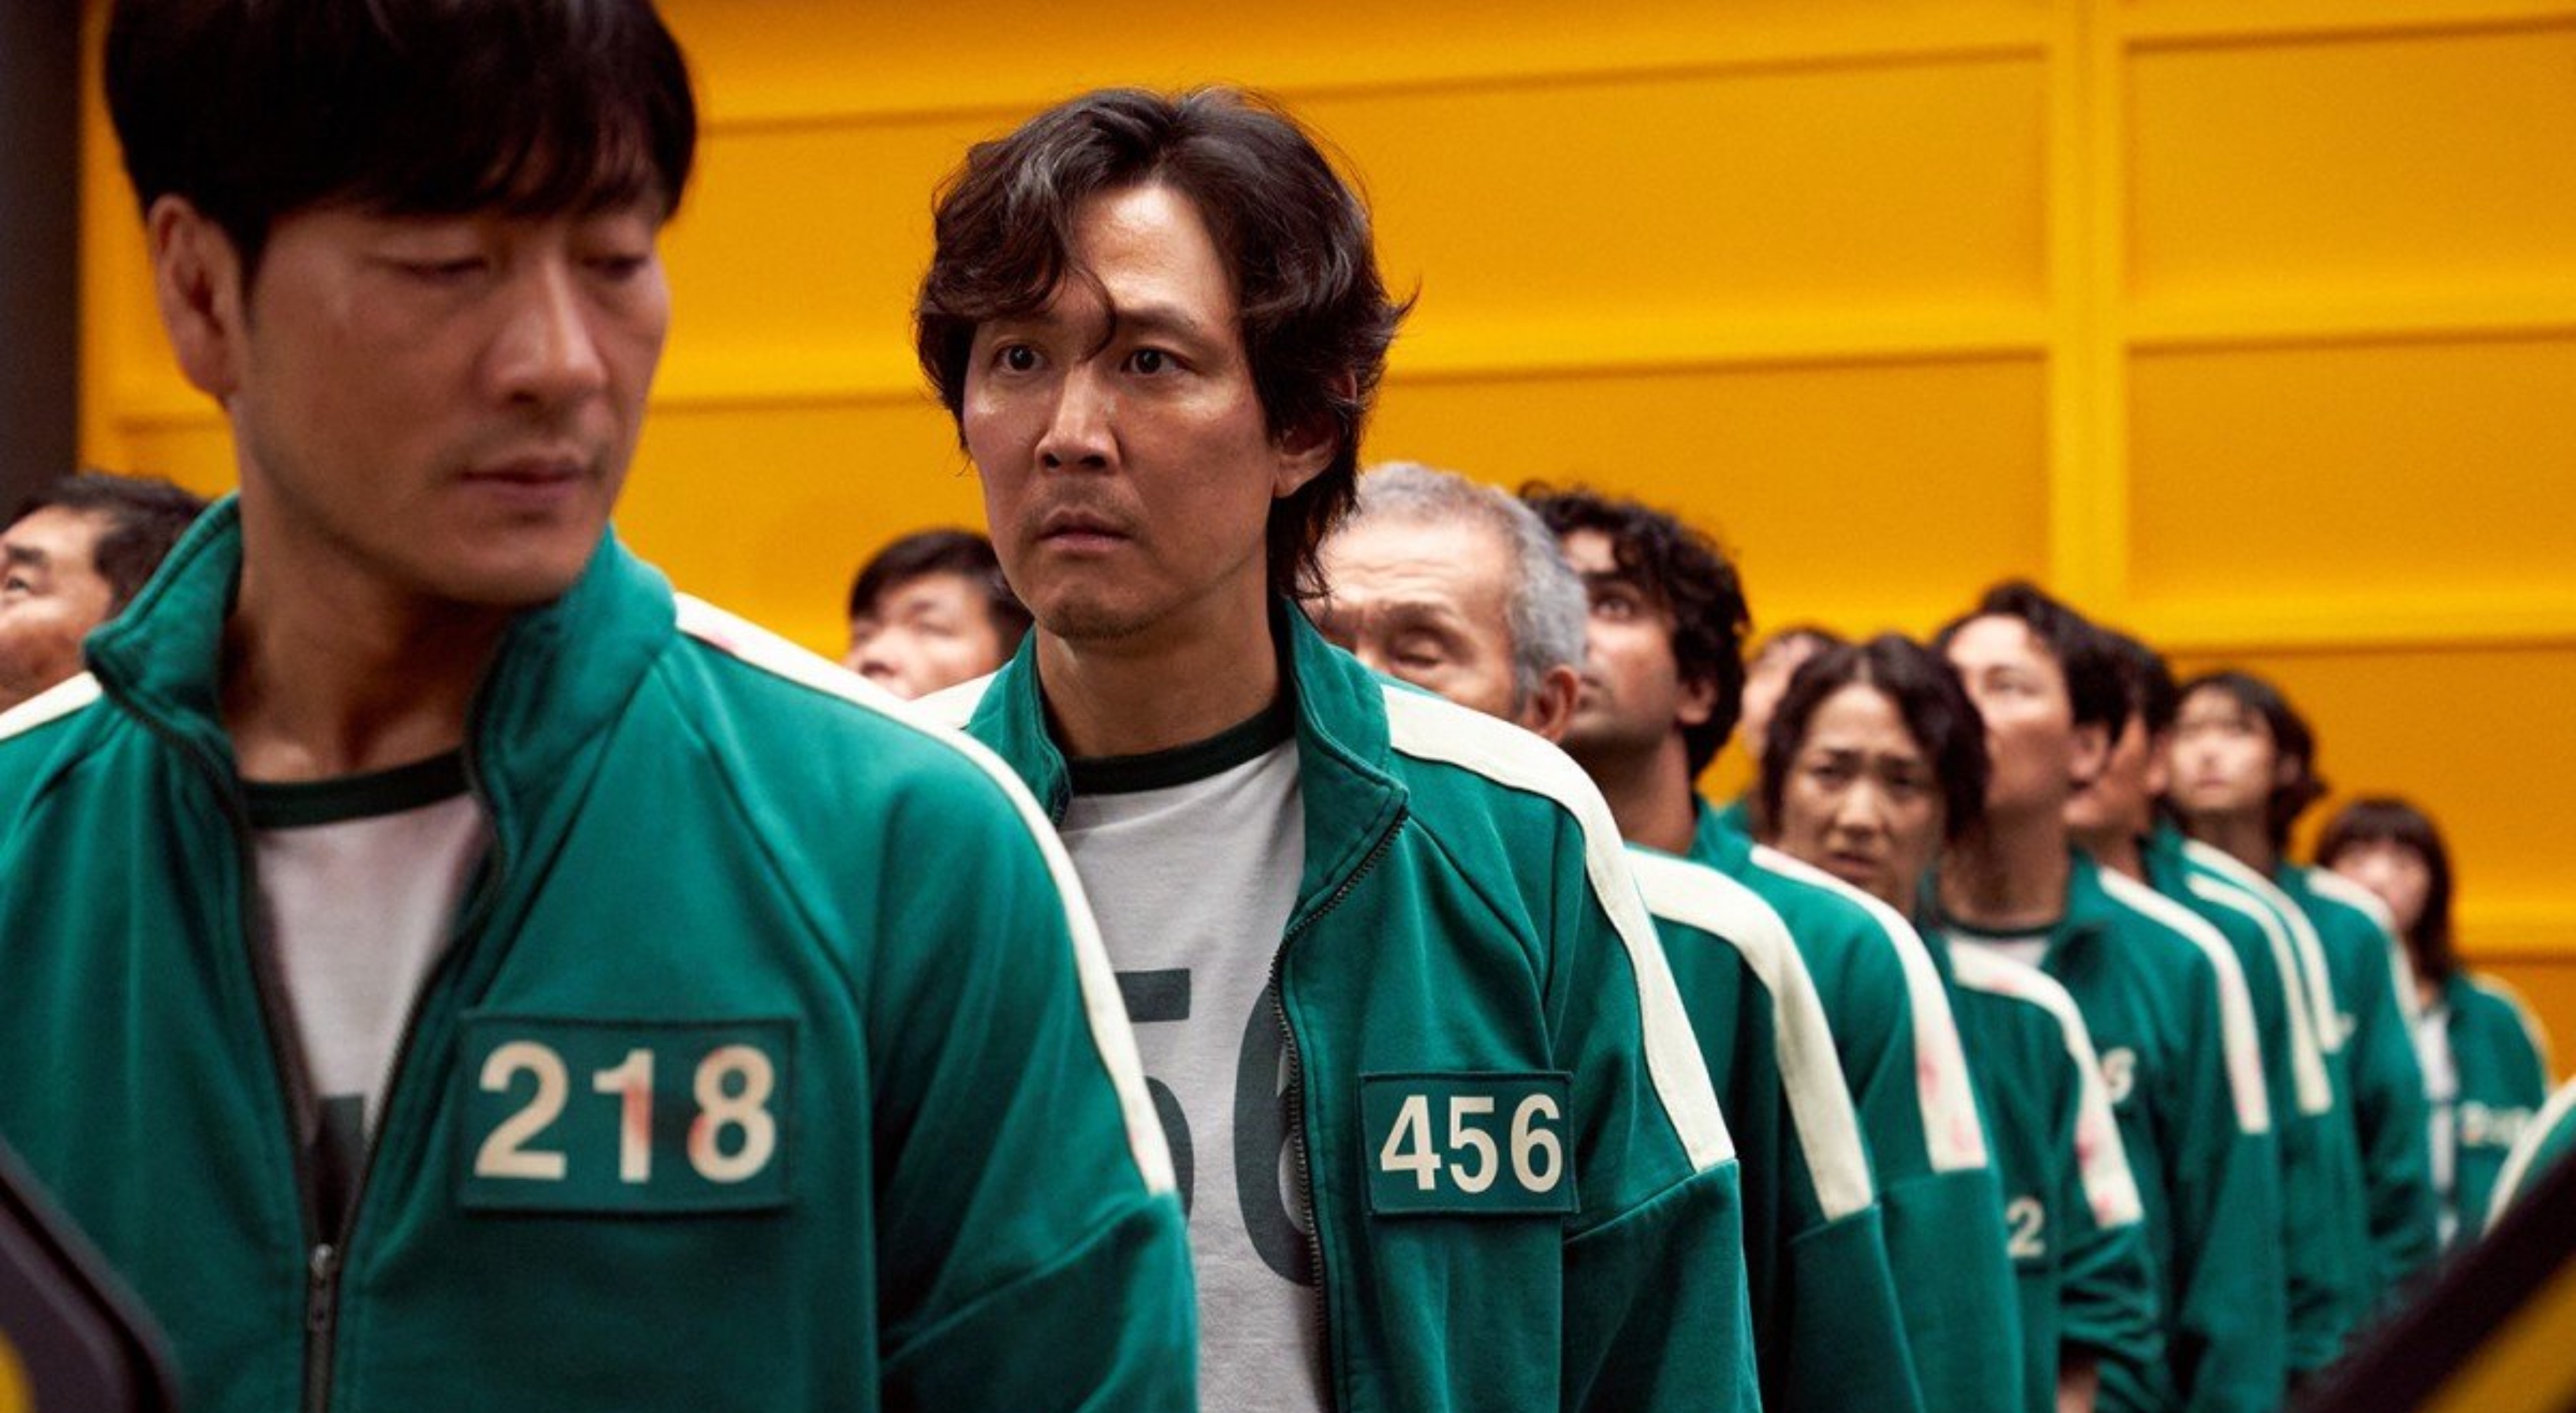 Lee Jung-Jae in Netflix's 'Squid Game' cast wearing green tracksuit in a line with other cast members